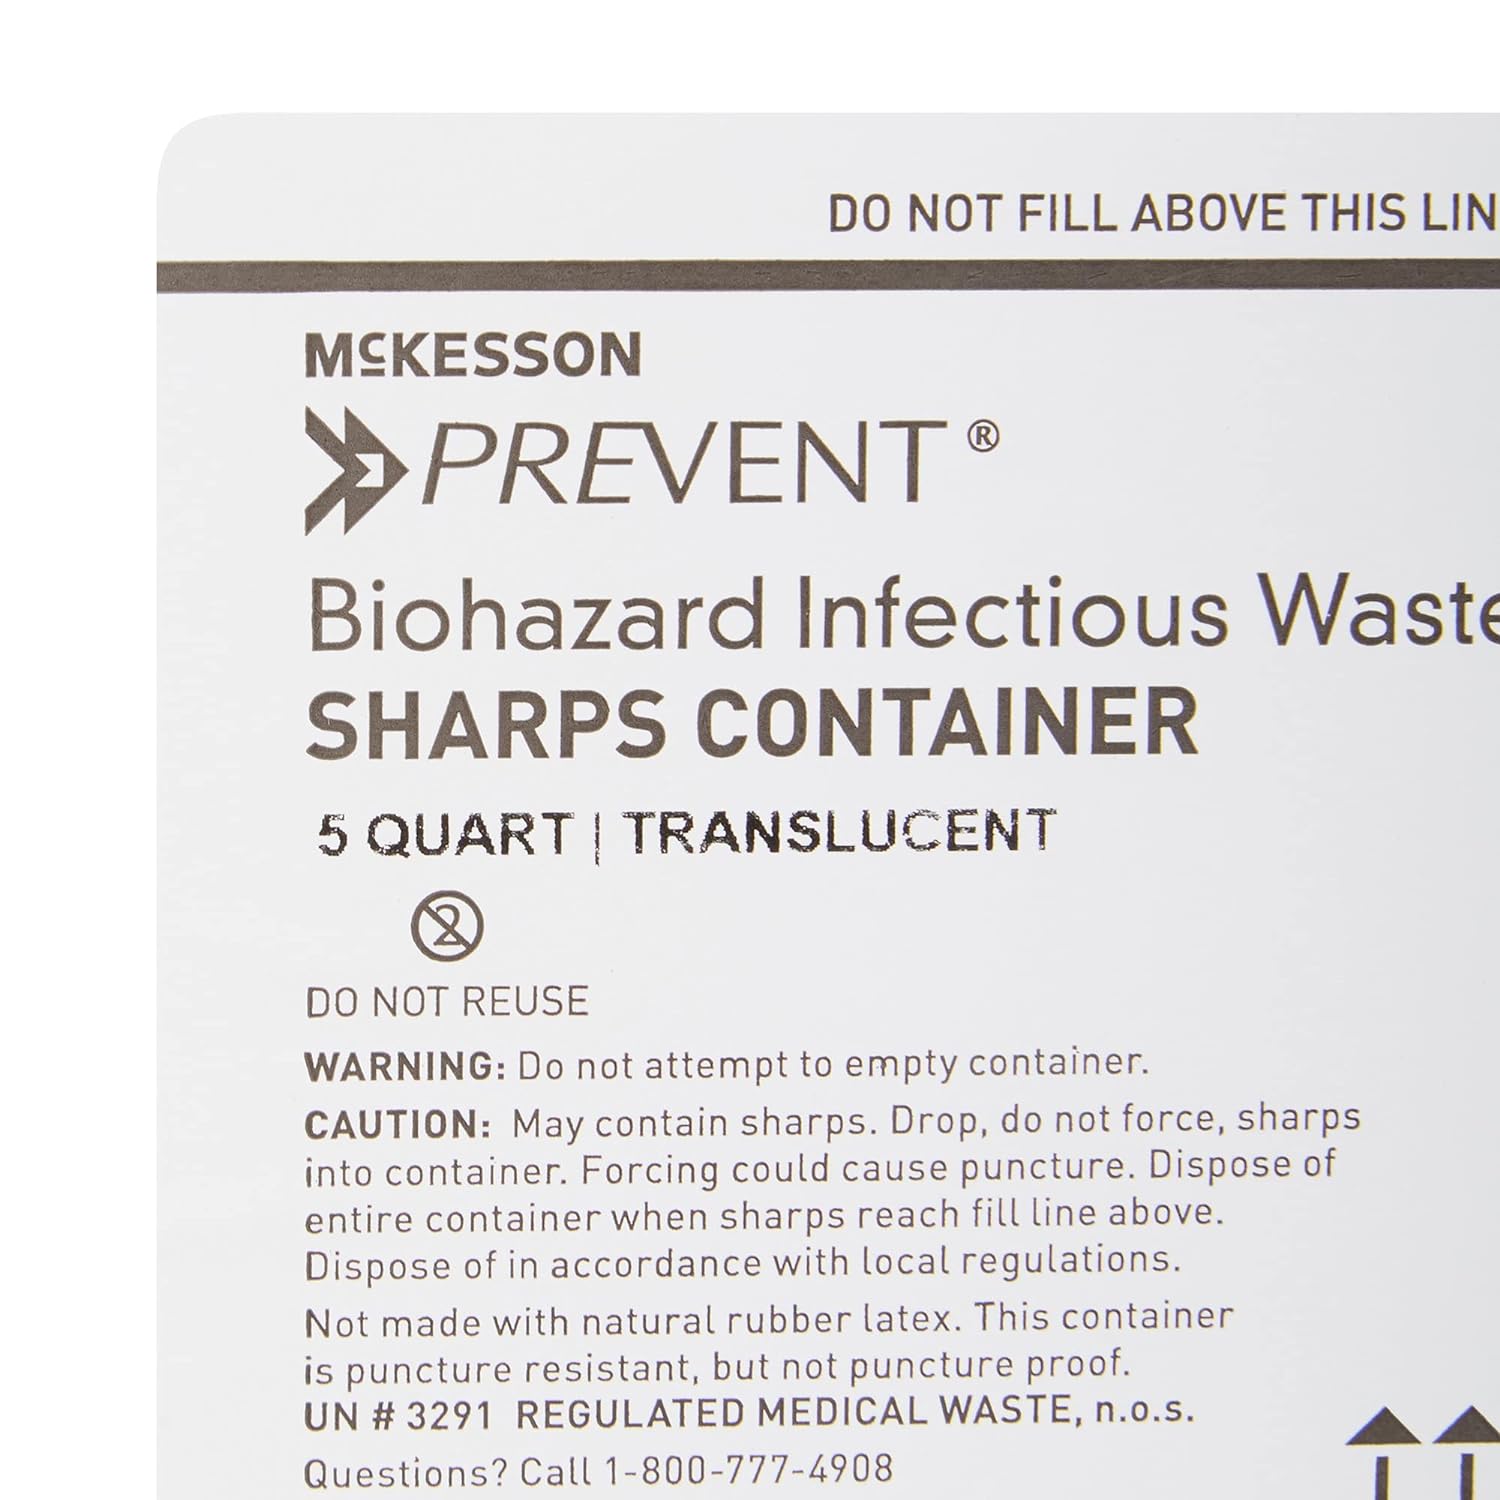 McKesson Prevent Sharps Container - Plastic, Horizontal Entry, Counter-Balanced Door Lid - White, 1.25 gal, 10 1/2 in x 4 3/4 in x 10 3/4 in, 1 Count